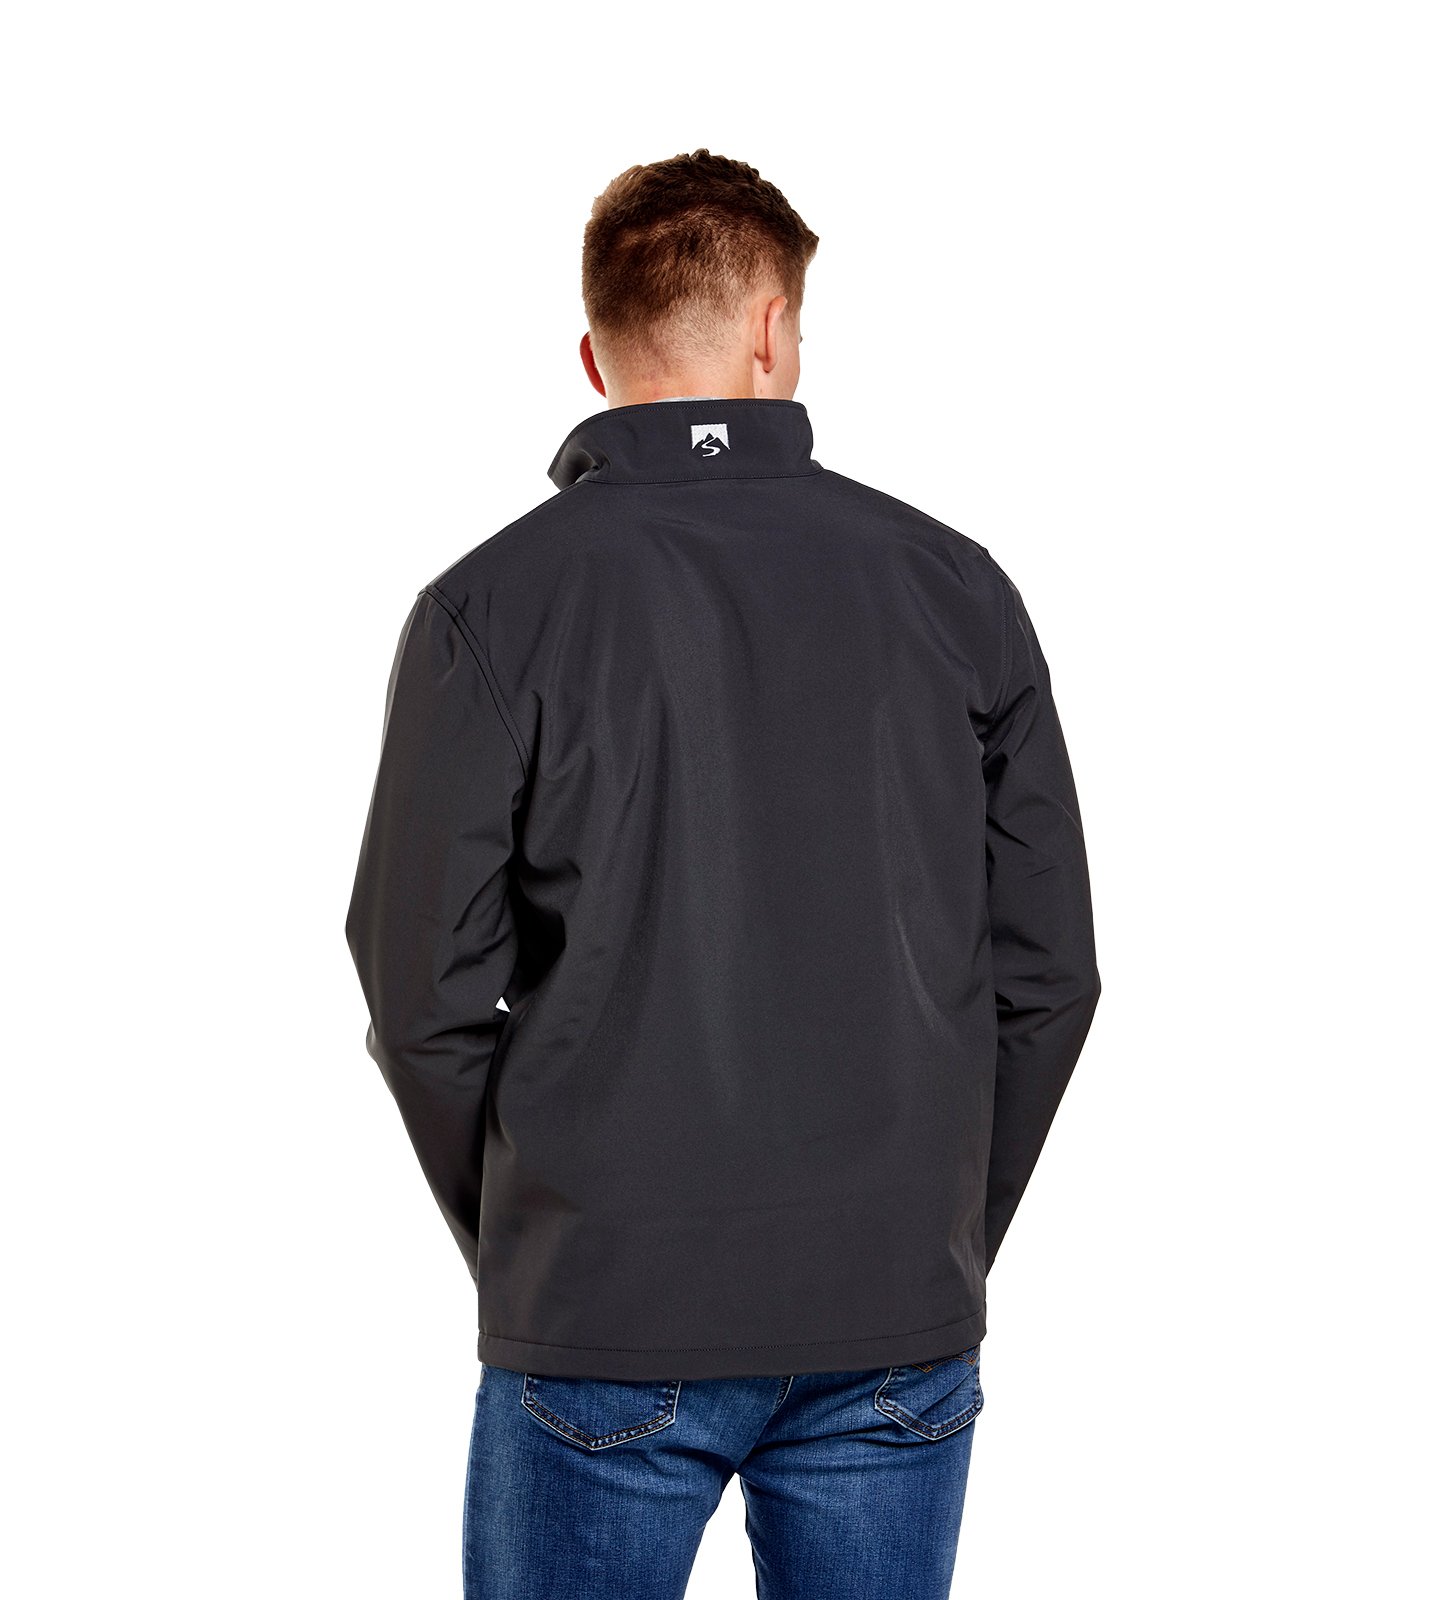 Recycled men's midweight softshell jacket with embroidery